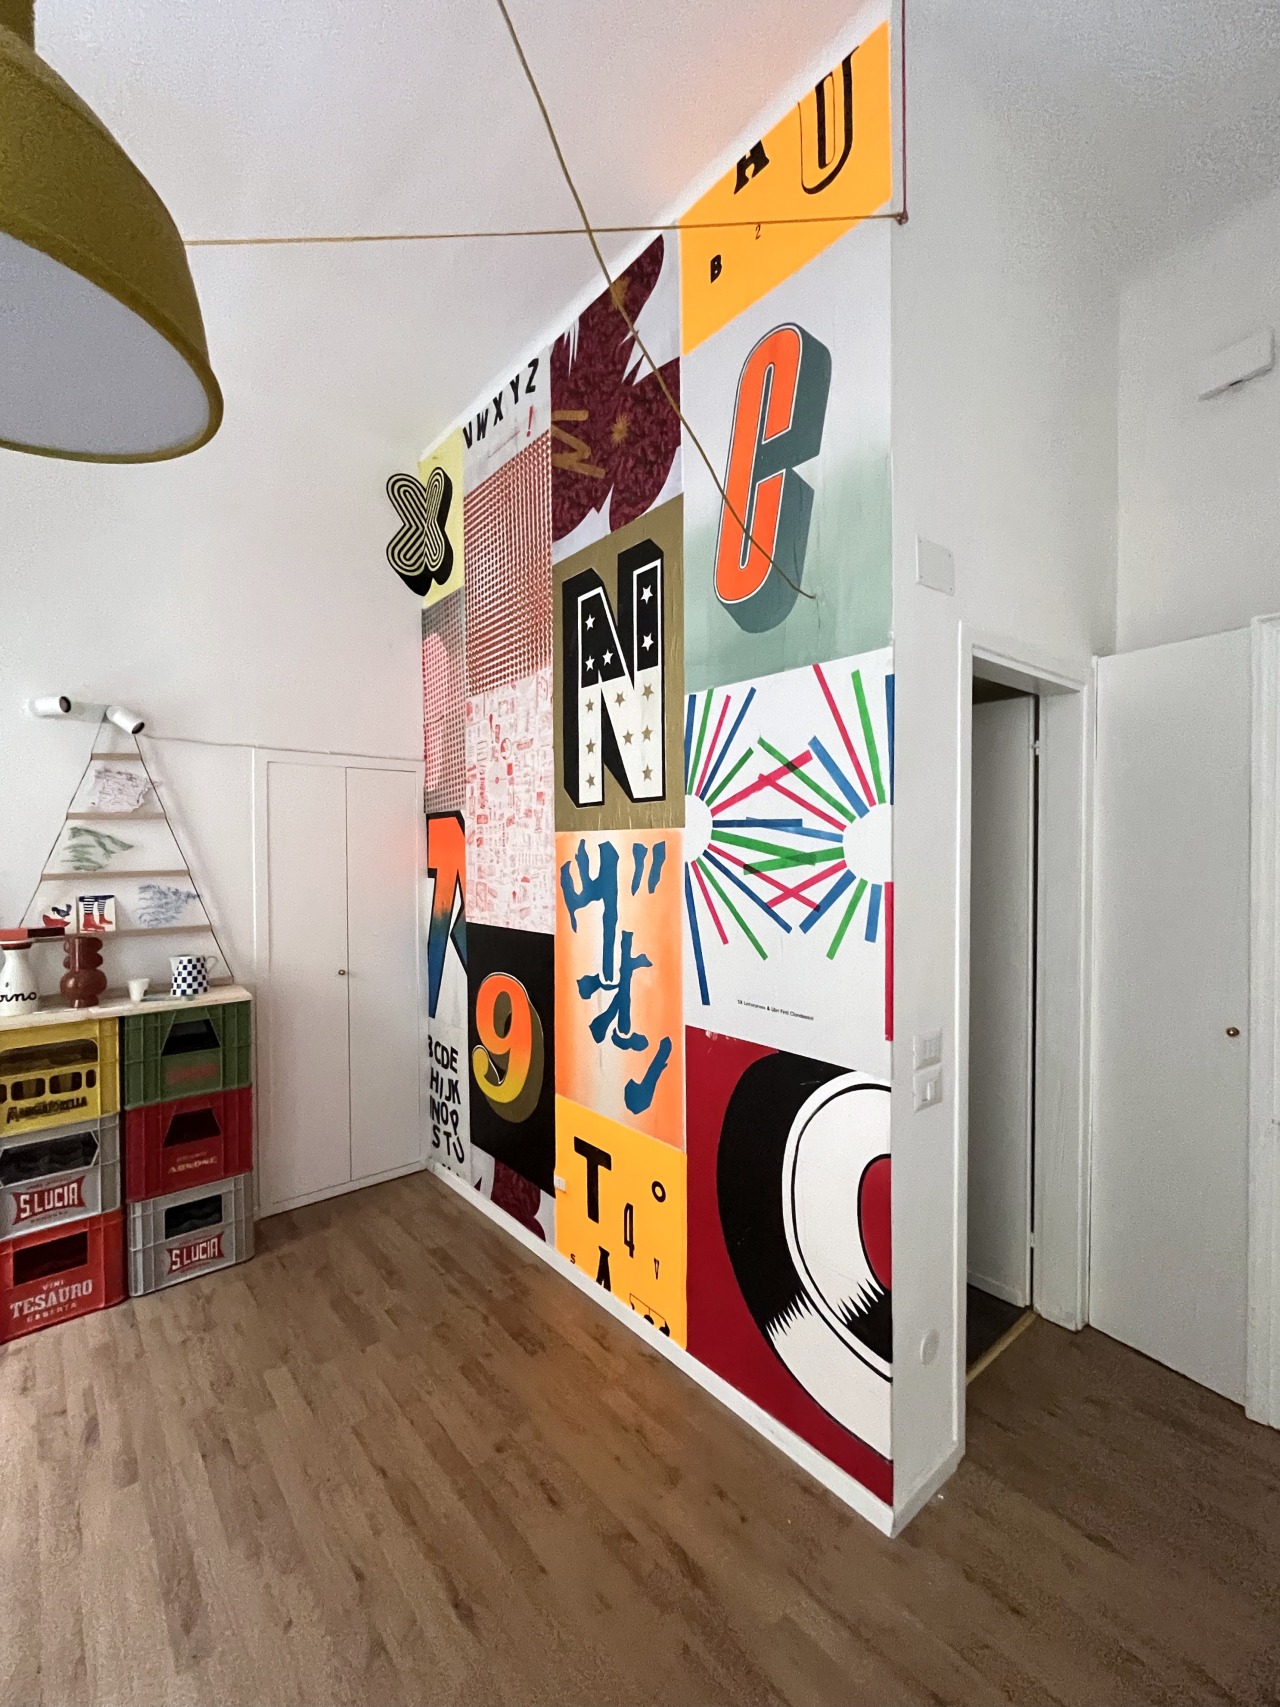 LFC & 5X present a new project for Pop-eye Studio 🚀
👉🏻 A permanent wall installation with 16 letterpress posters, specially designed and hand-printed for their studio 💎